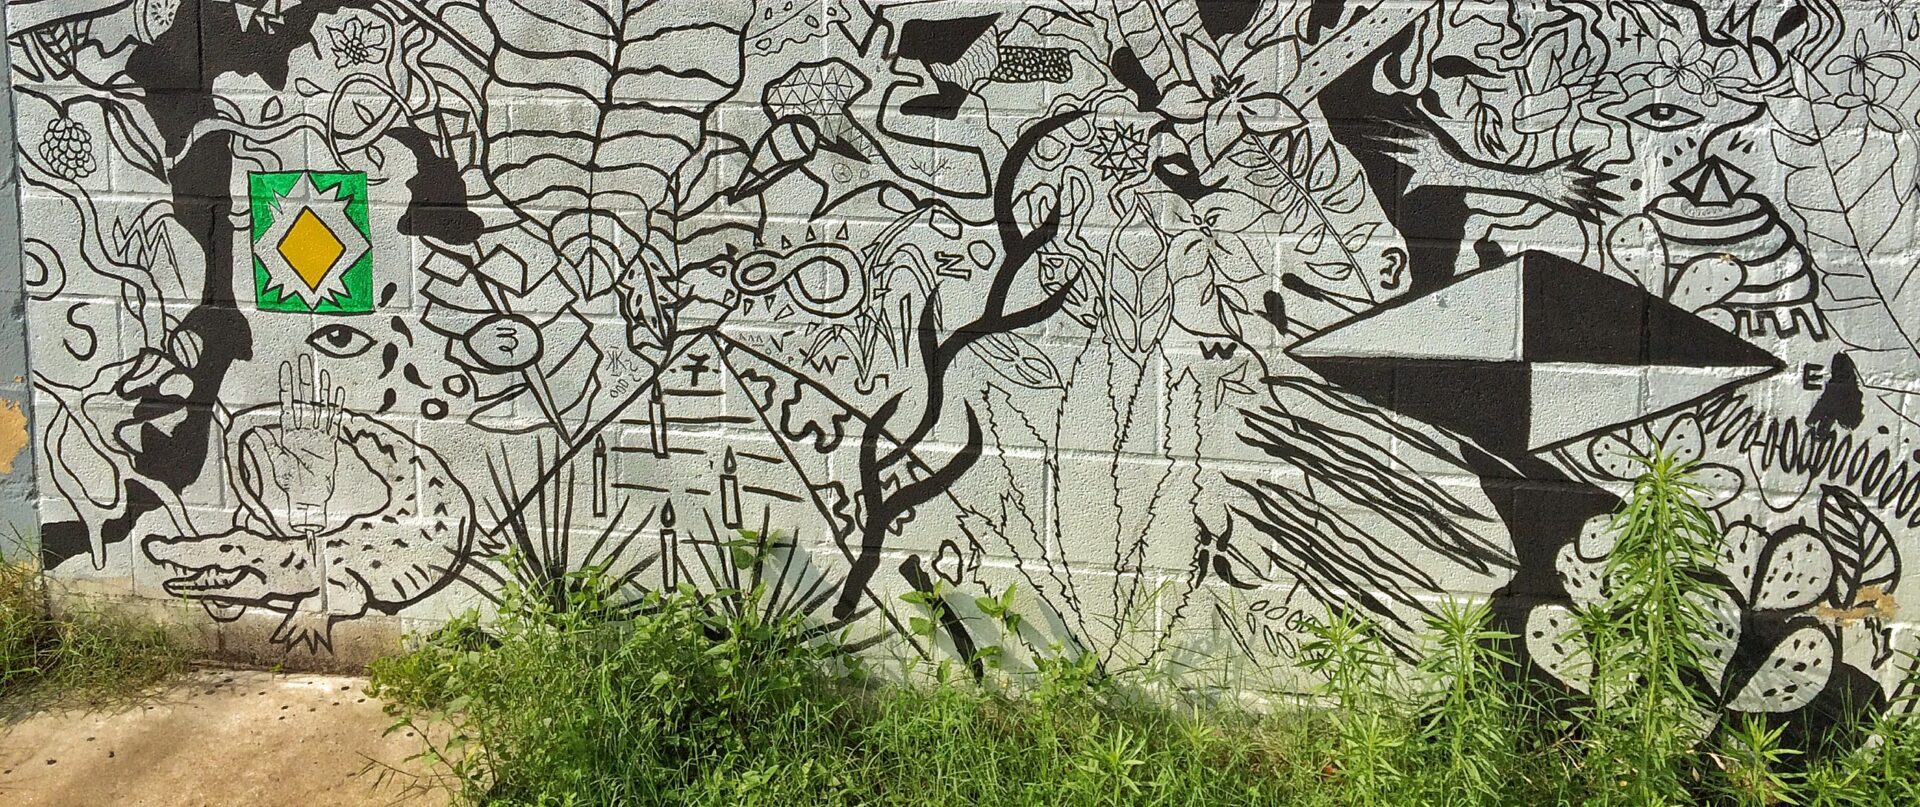 A black and white mural on the side of a building.